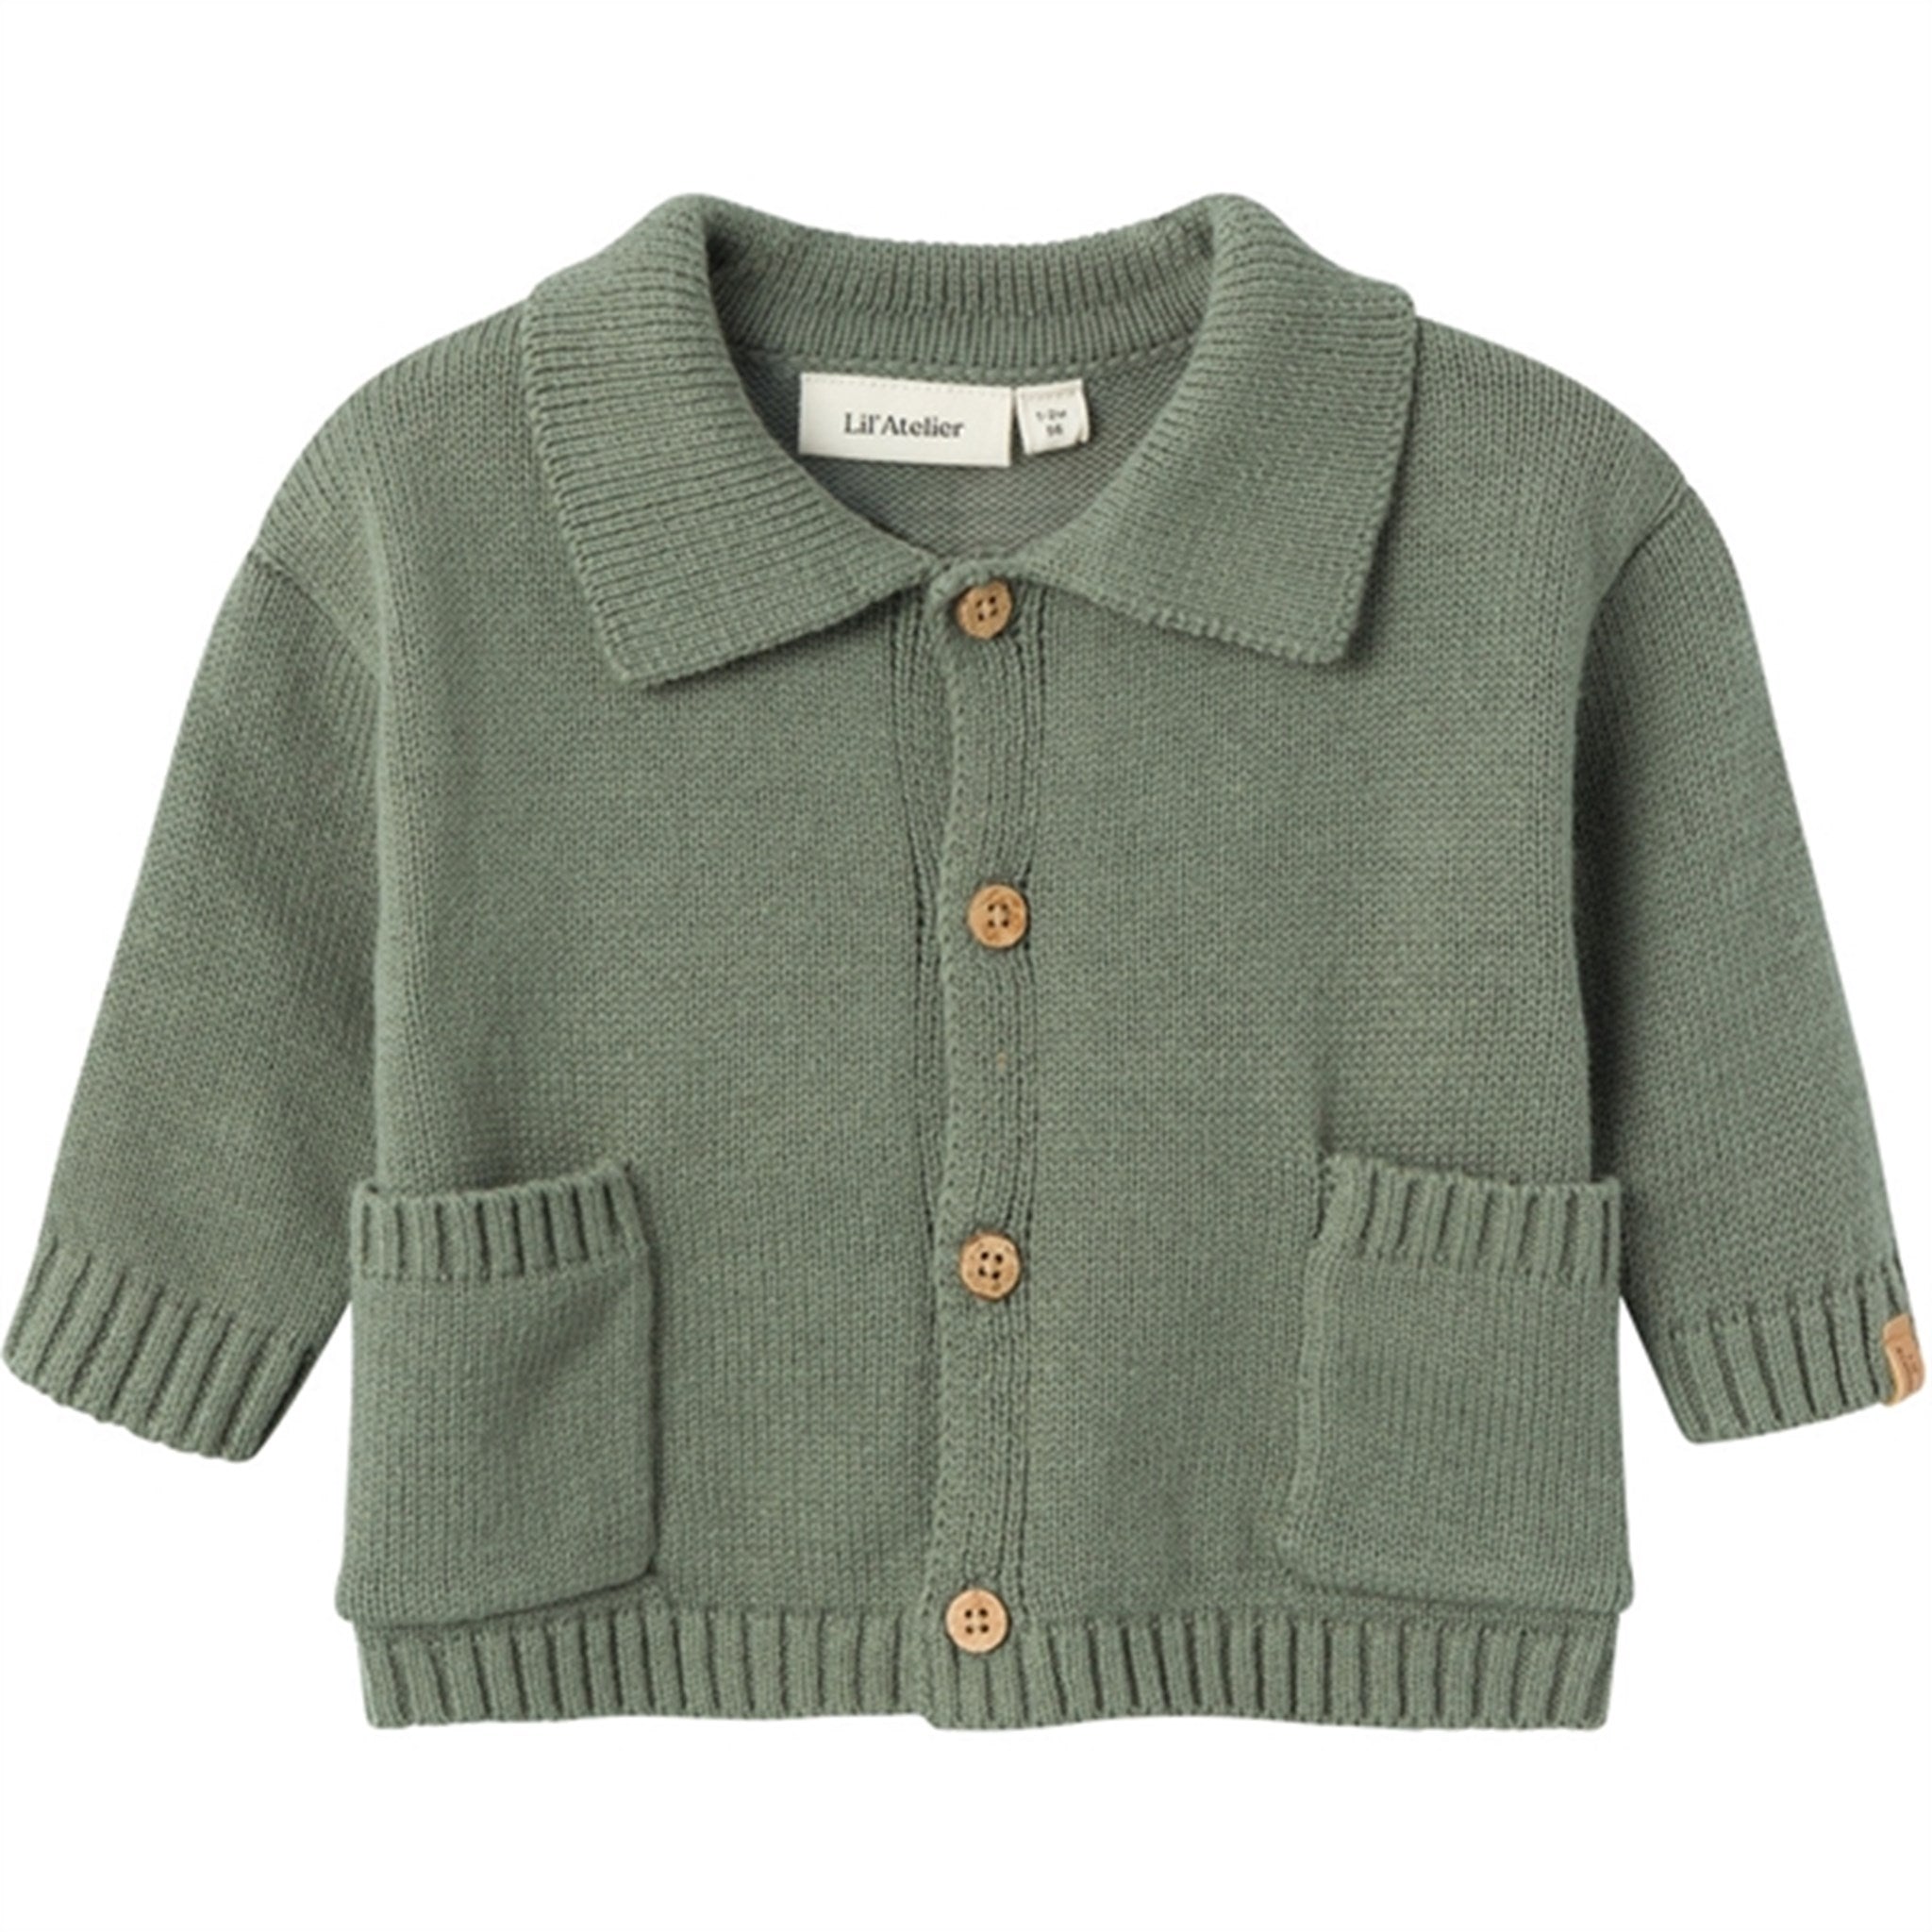 Lil'Atelier Agave Green Theo Loose Stickat Cardigan